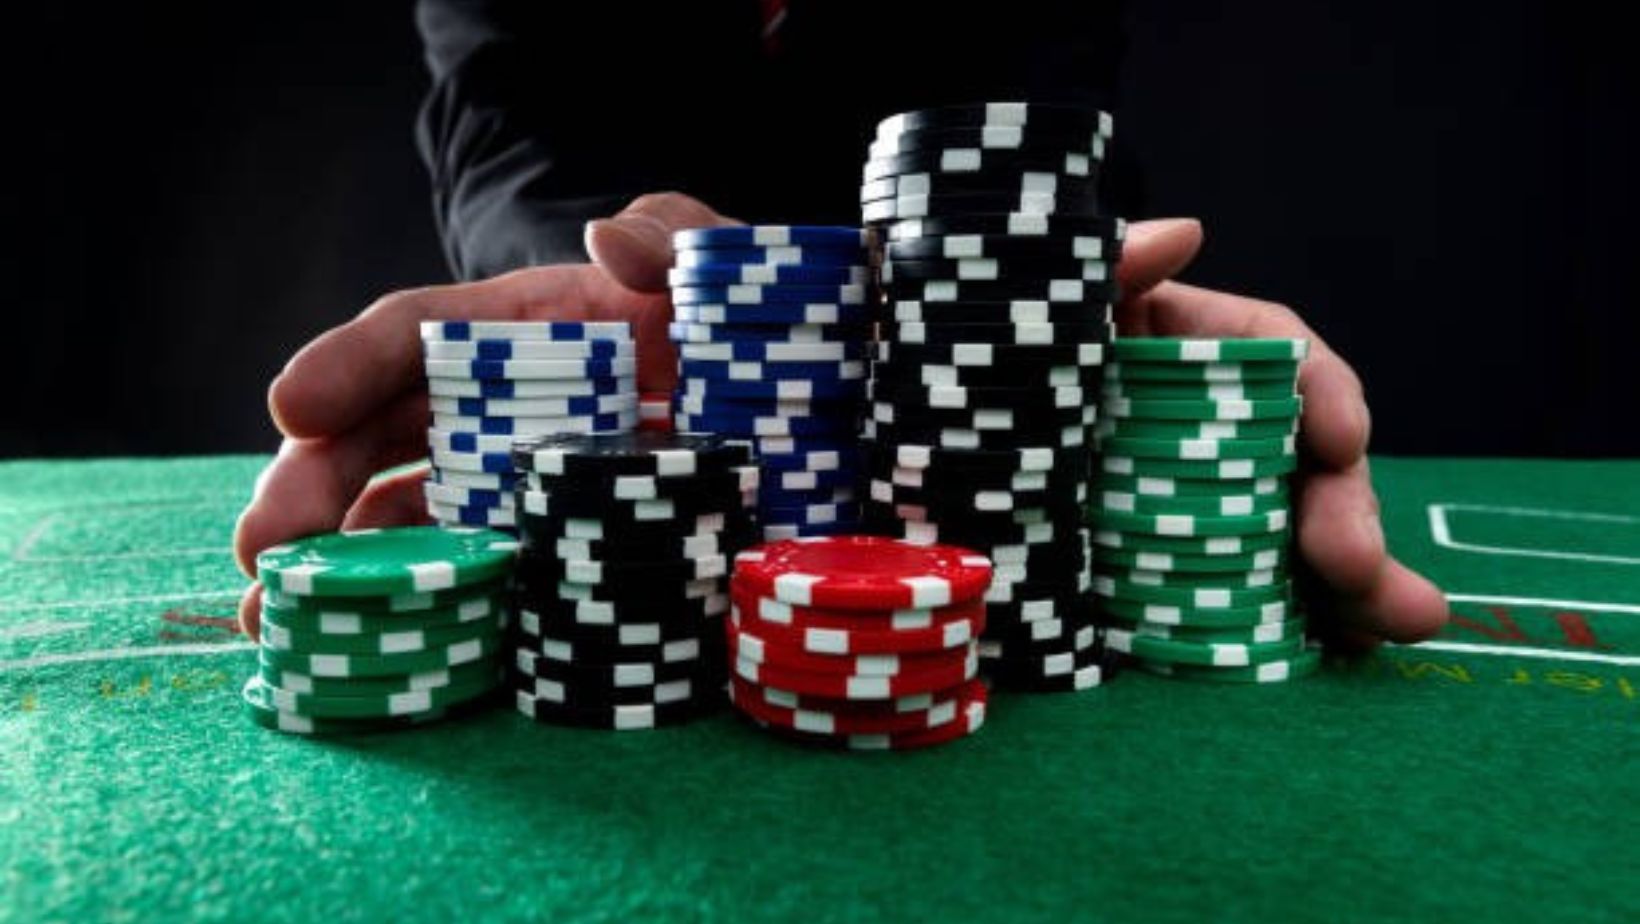 Man goes all-in with high-stakes bet in intense poker game.